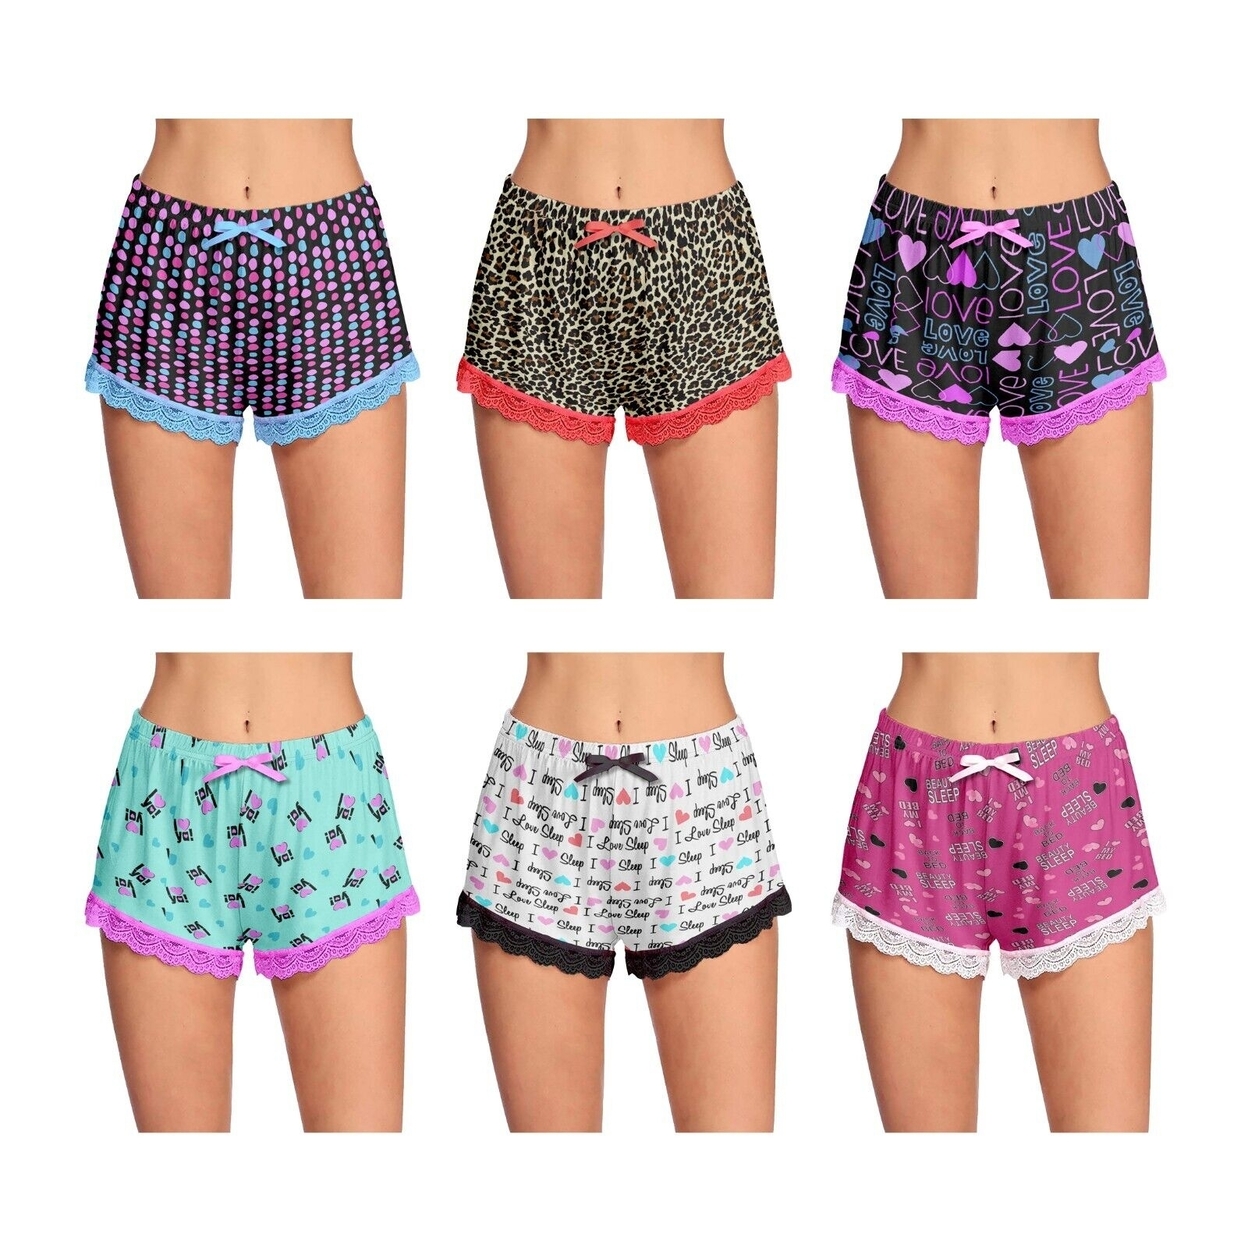 Multi-Pack: Women's Ultra-Soft Cozy Fun Printed Lace Trim Pajama Lounge Shorts - 3-pack, Small, Shapes